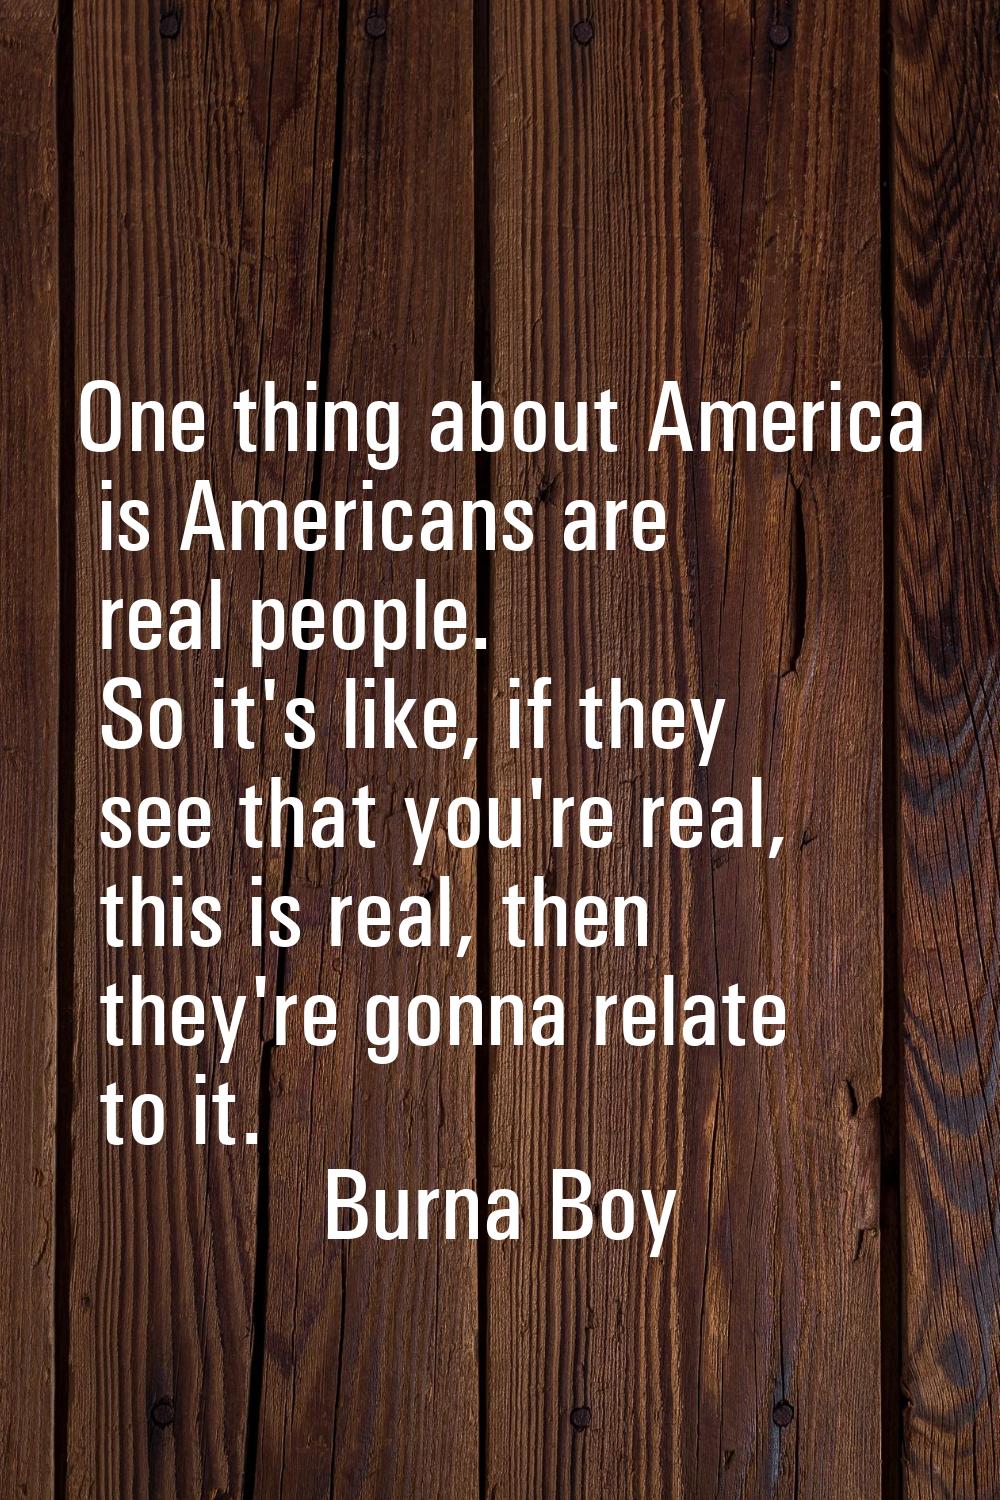 One thing about America is Americans are real people. So it's like, if they see that you're real, t